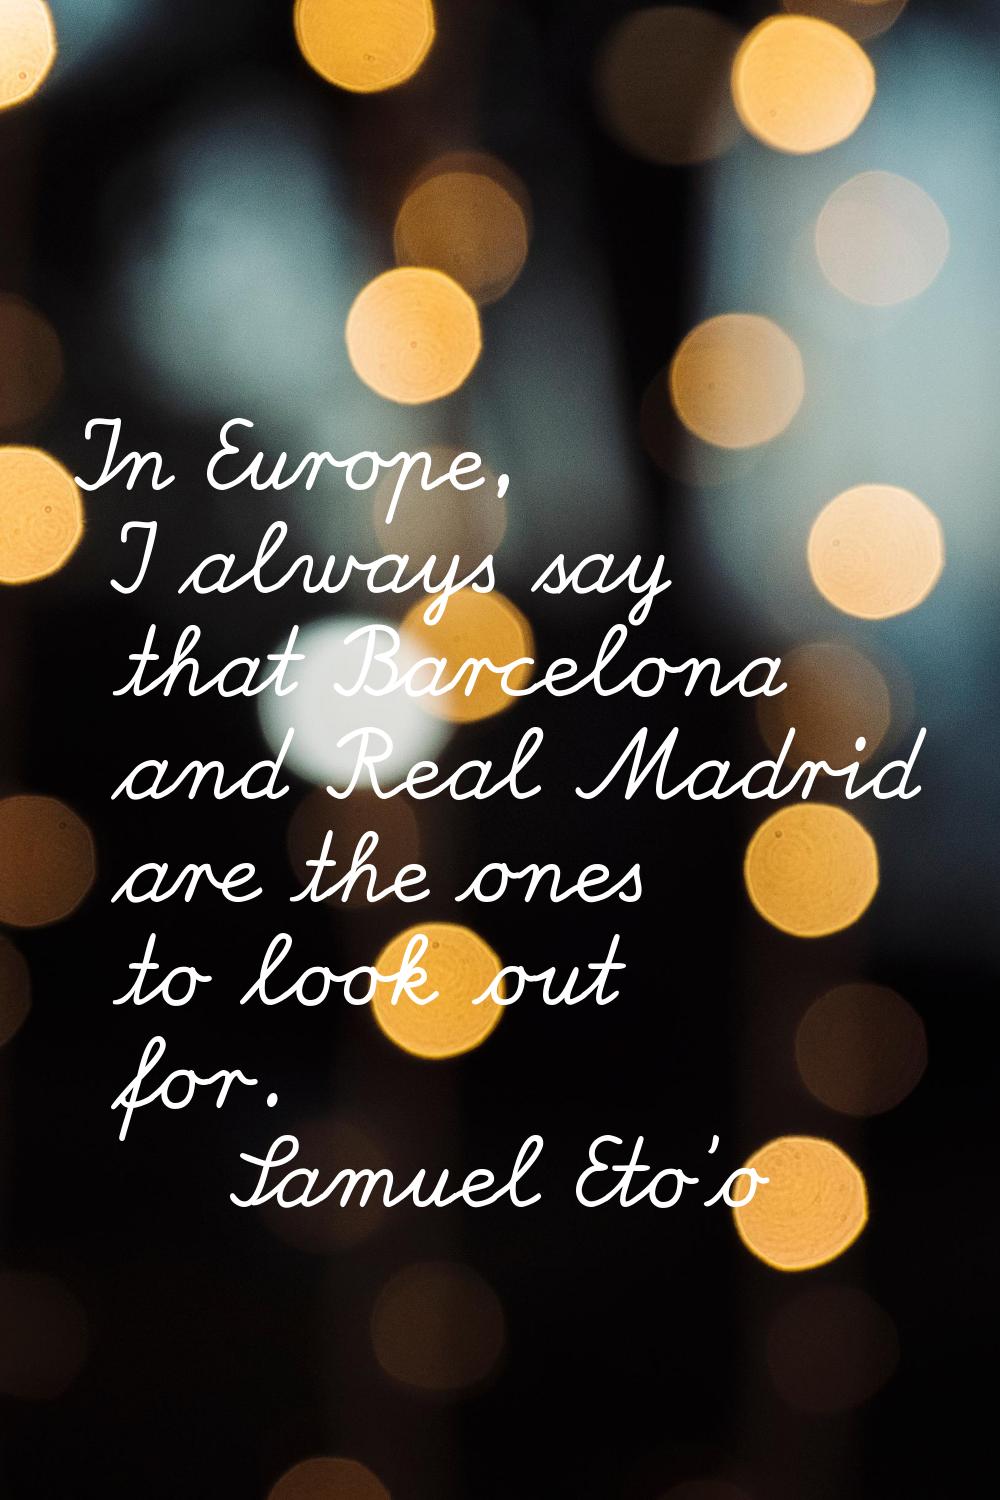 In Europe, I always say that Barcelona and Real Madrid are the ones to look out for.